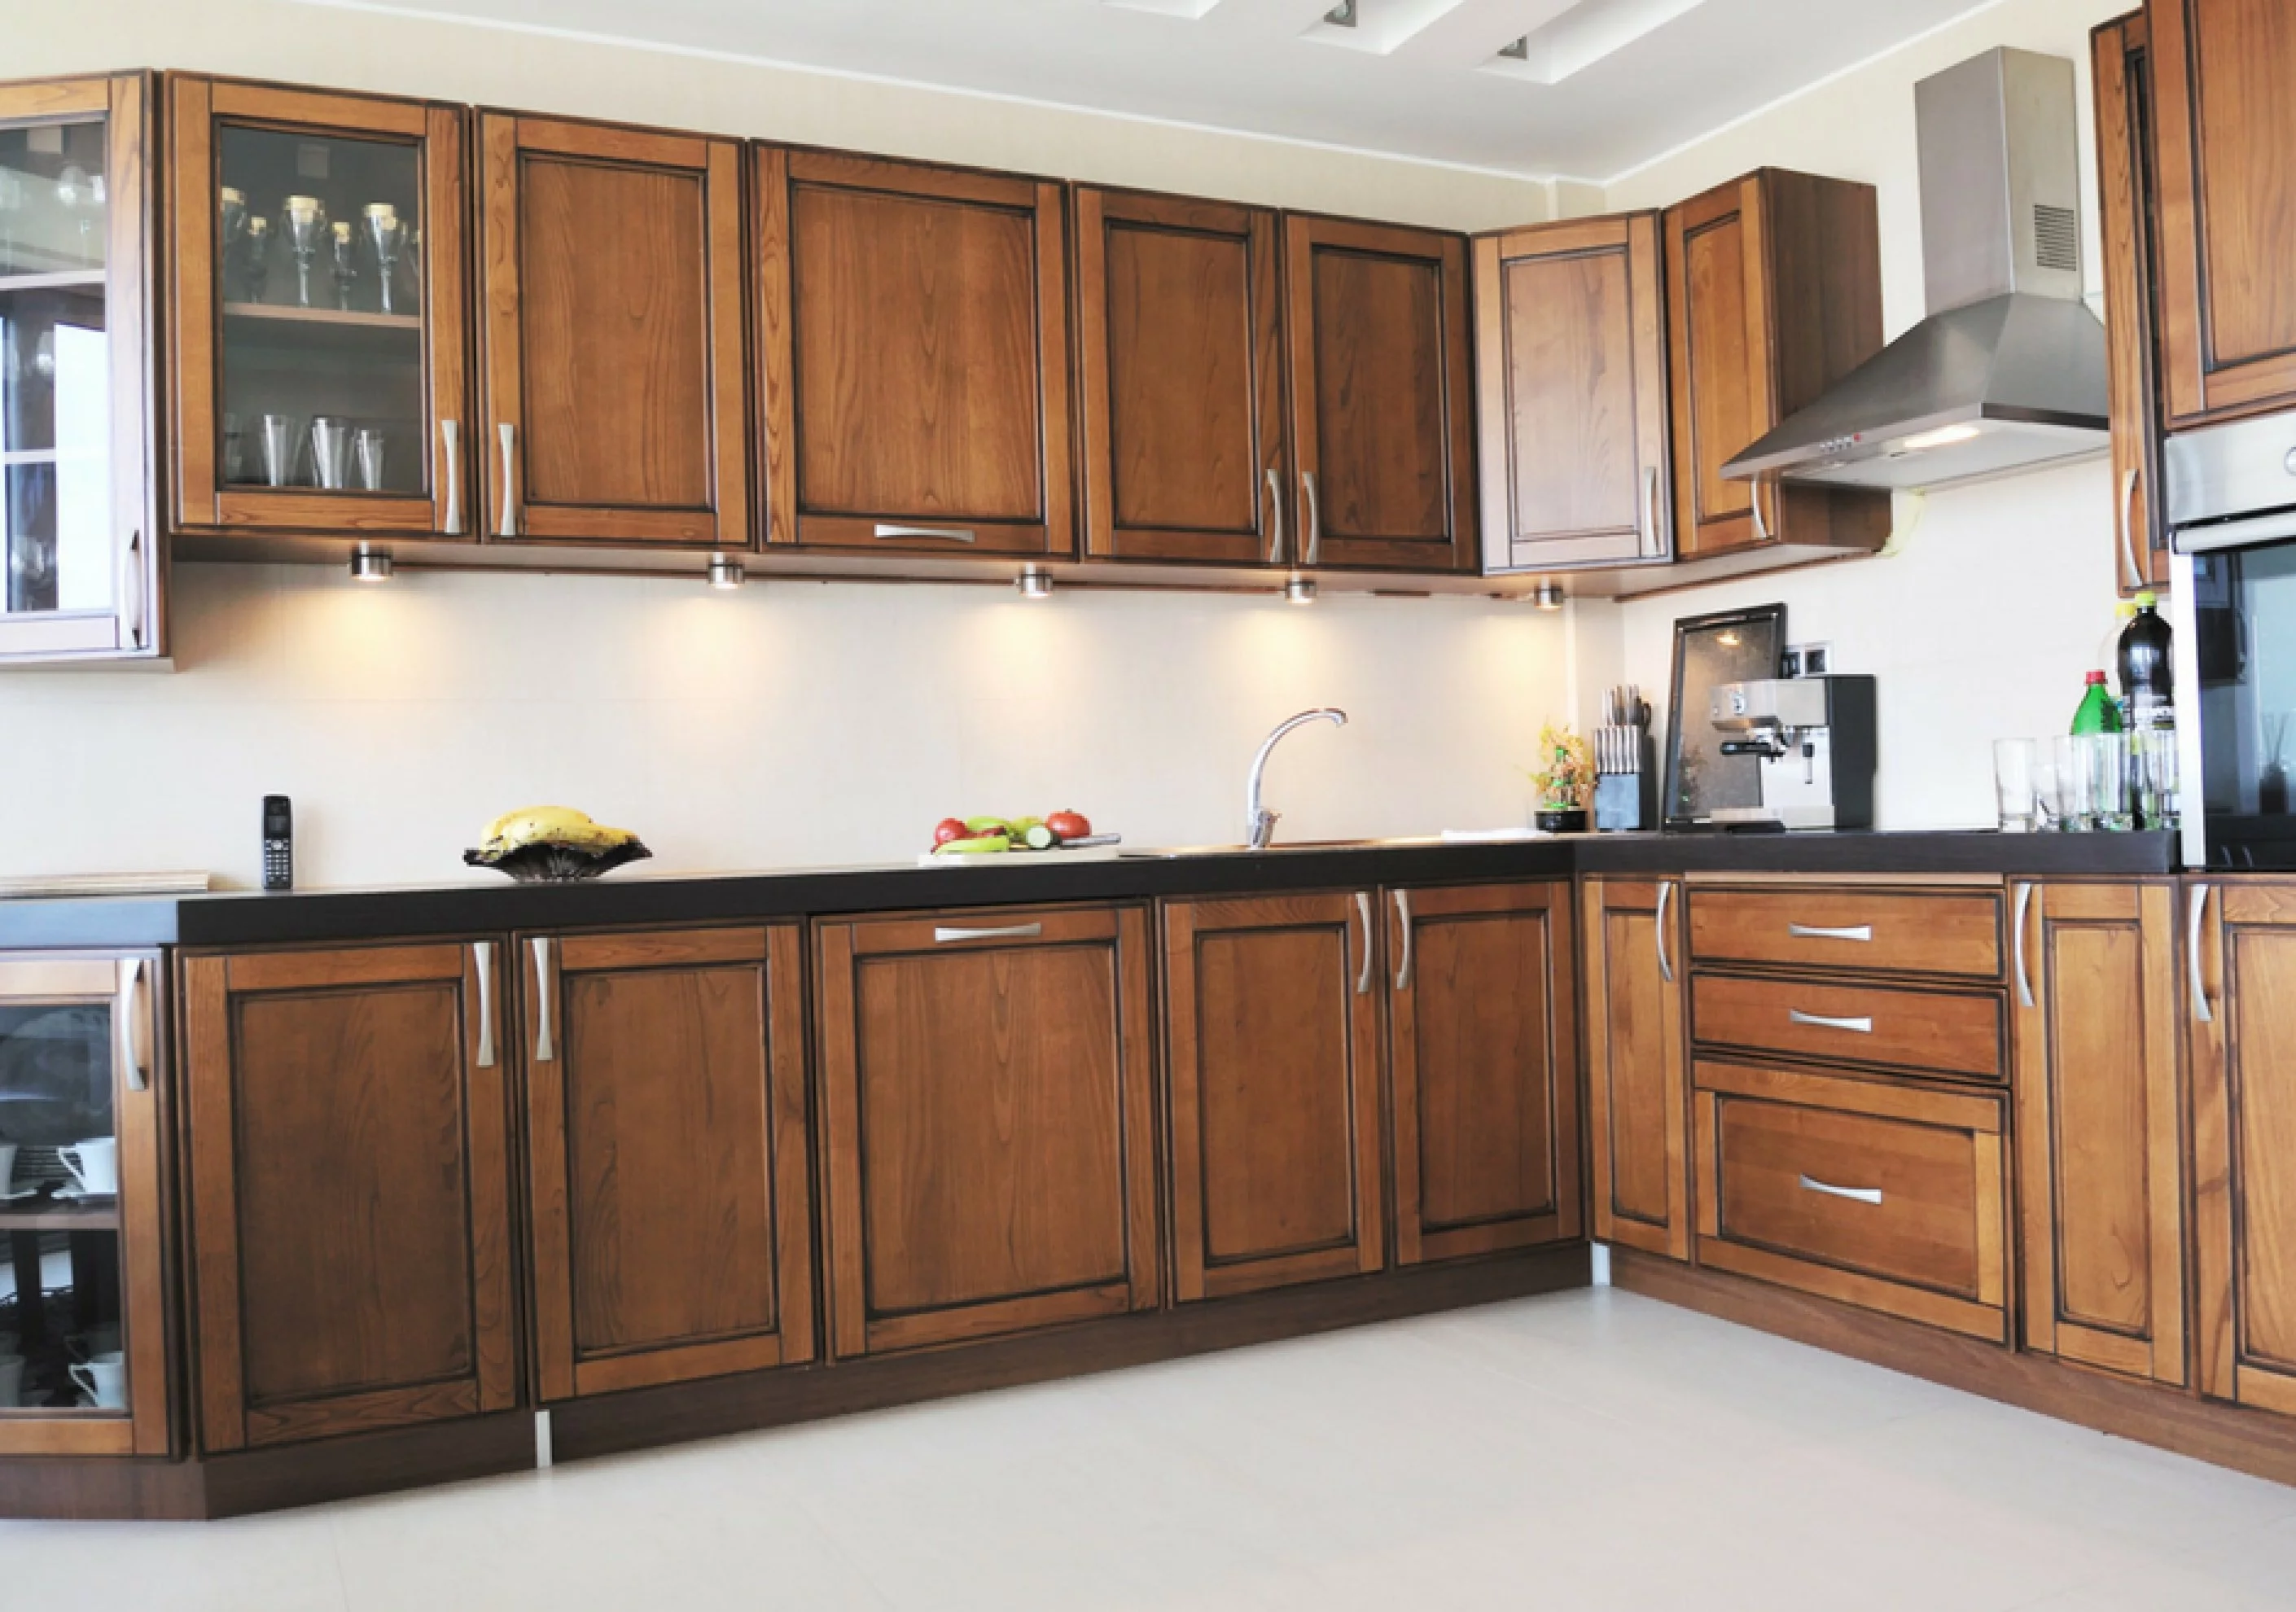 Particle Board vs Plywood in Kitchen Cabinetry